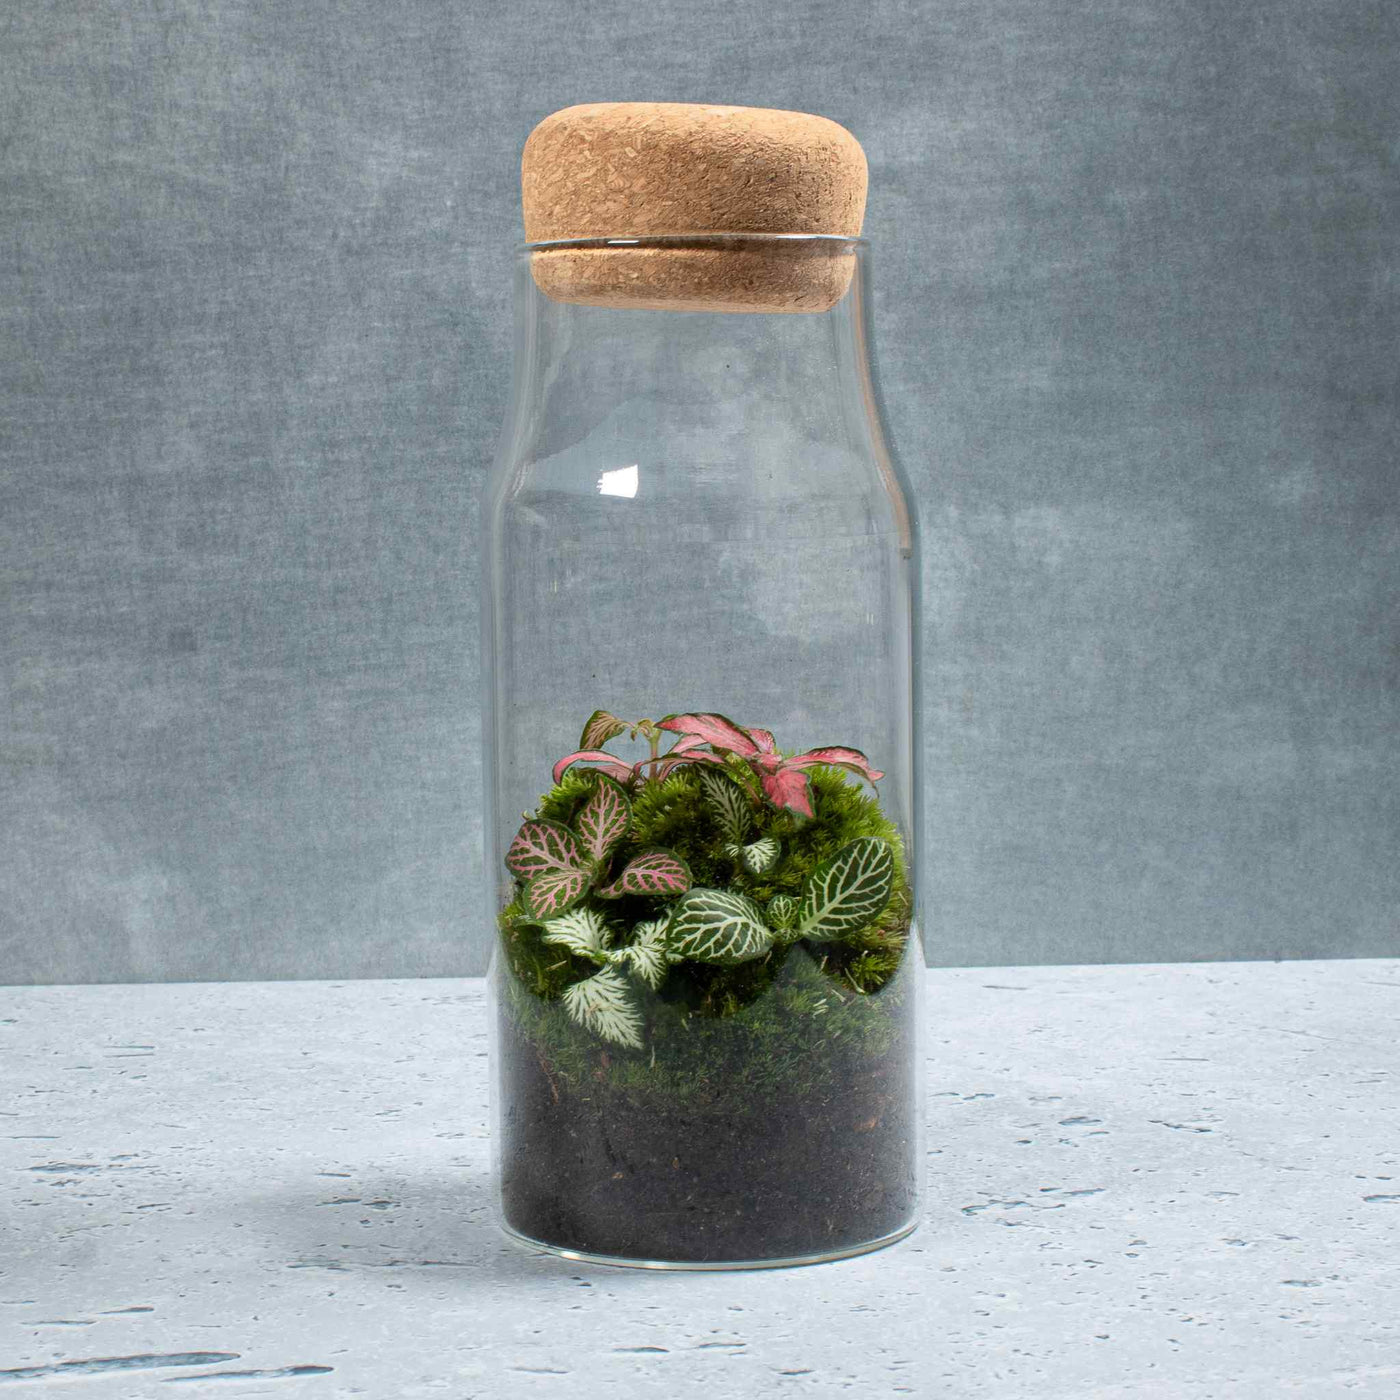 Plant lover gifts - ready made terrariums 